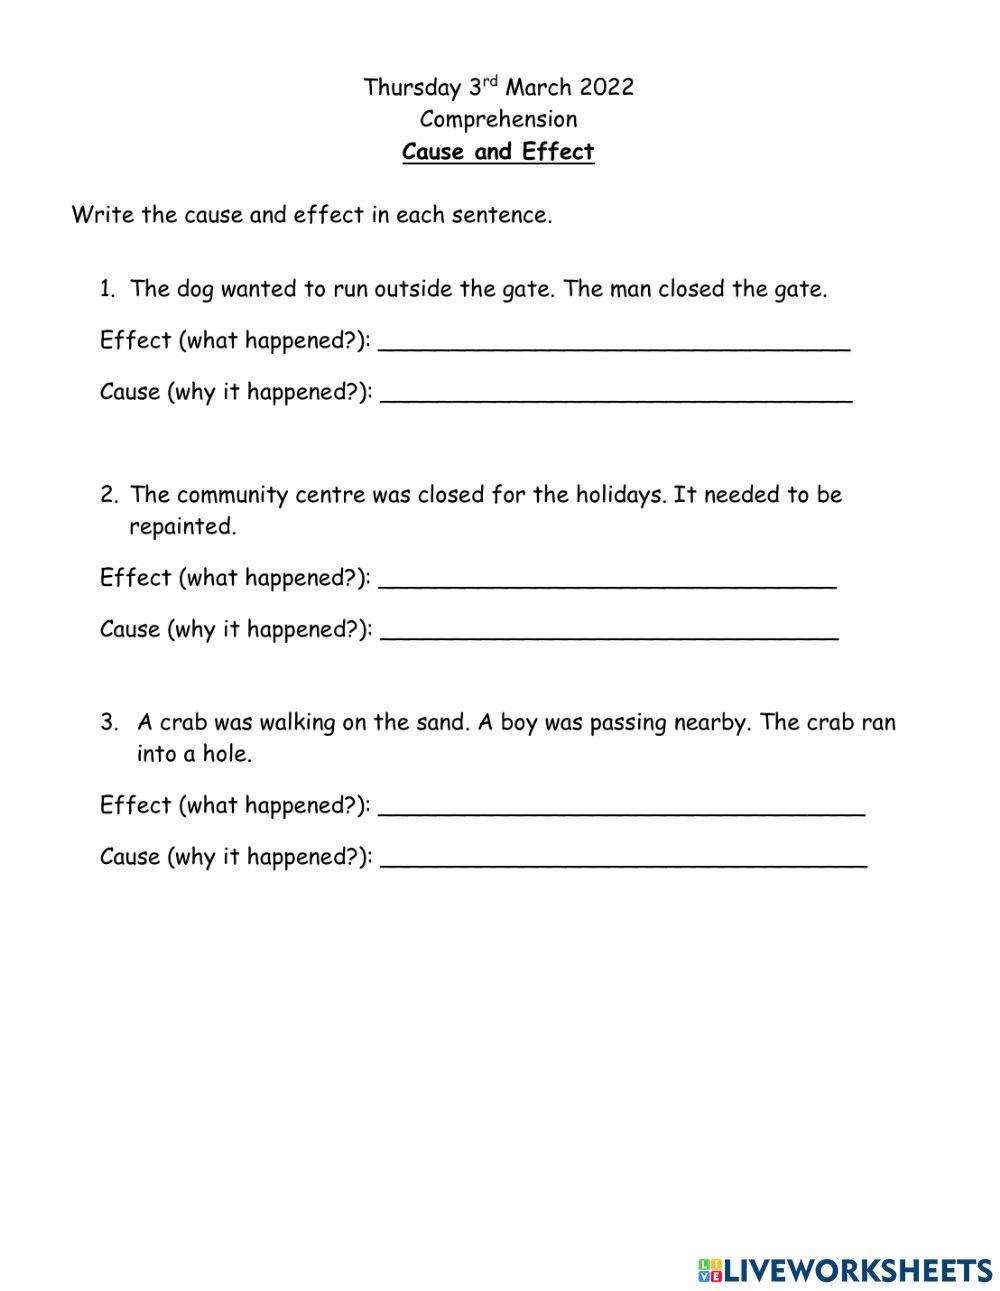 Cause and Effect - Worksheet 2